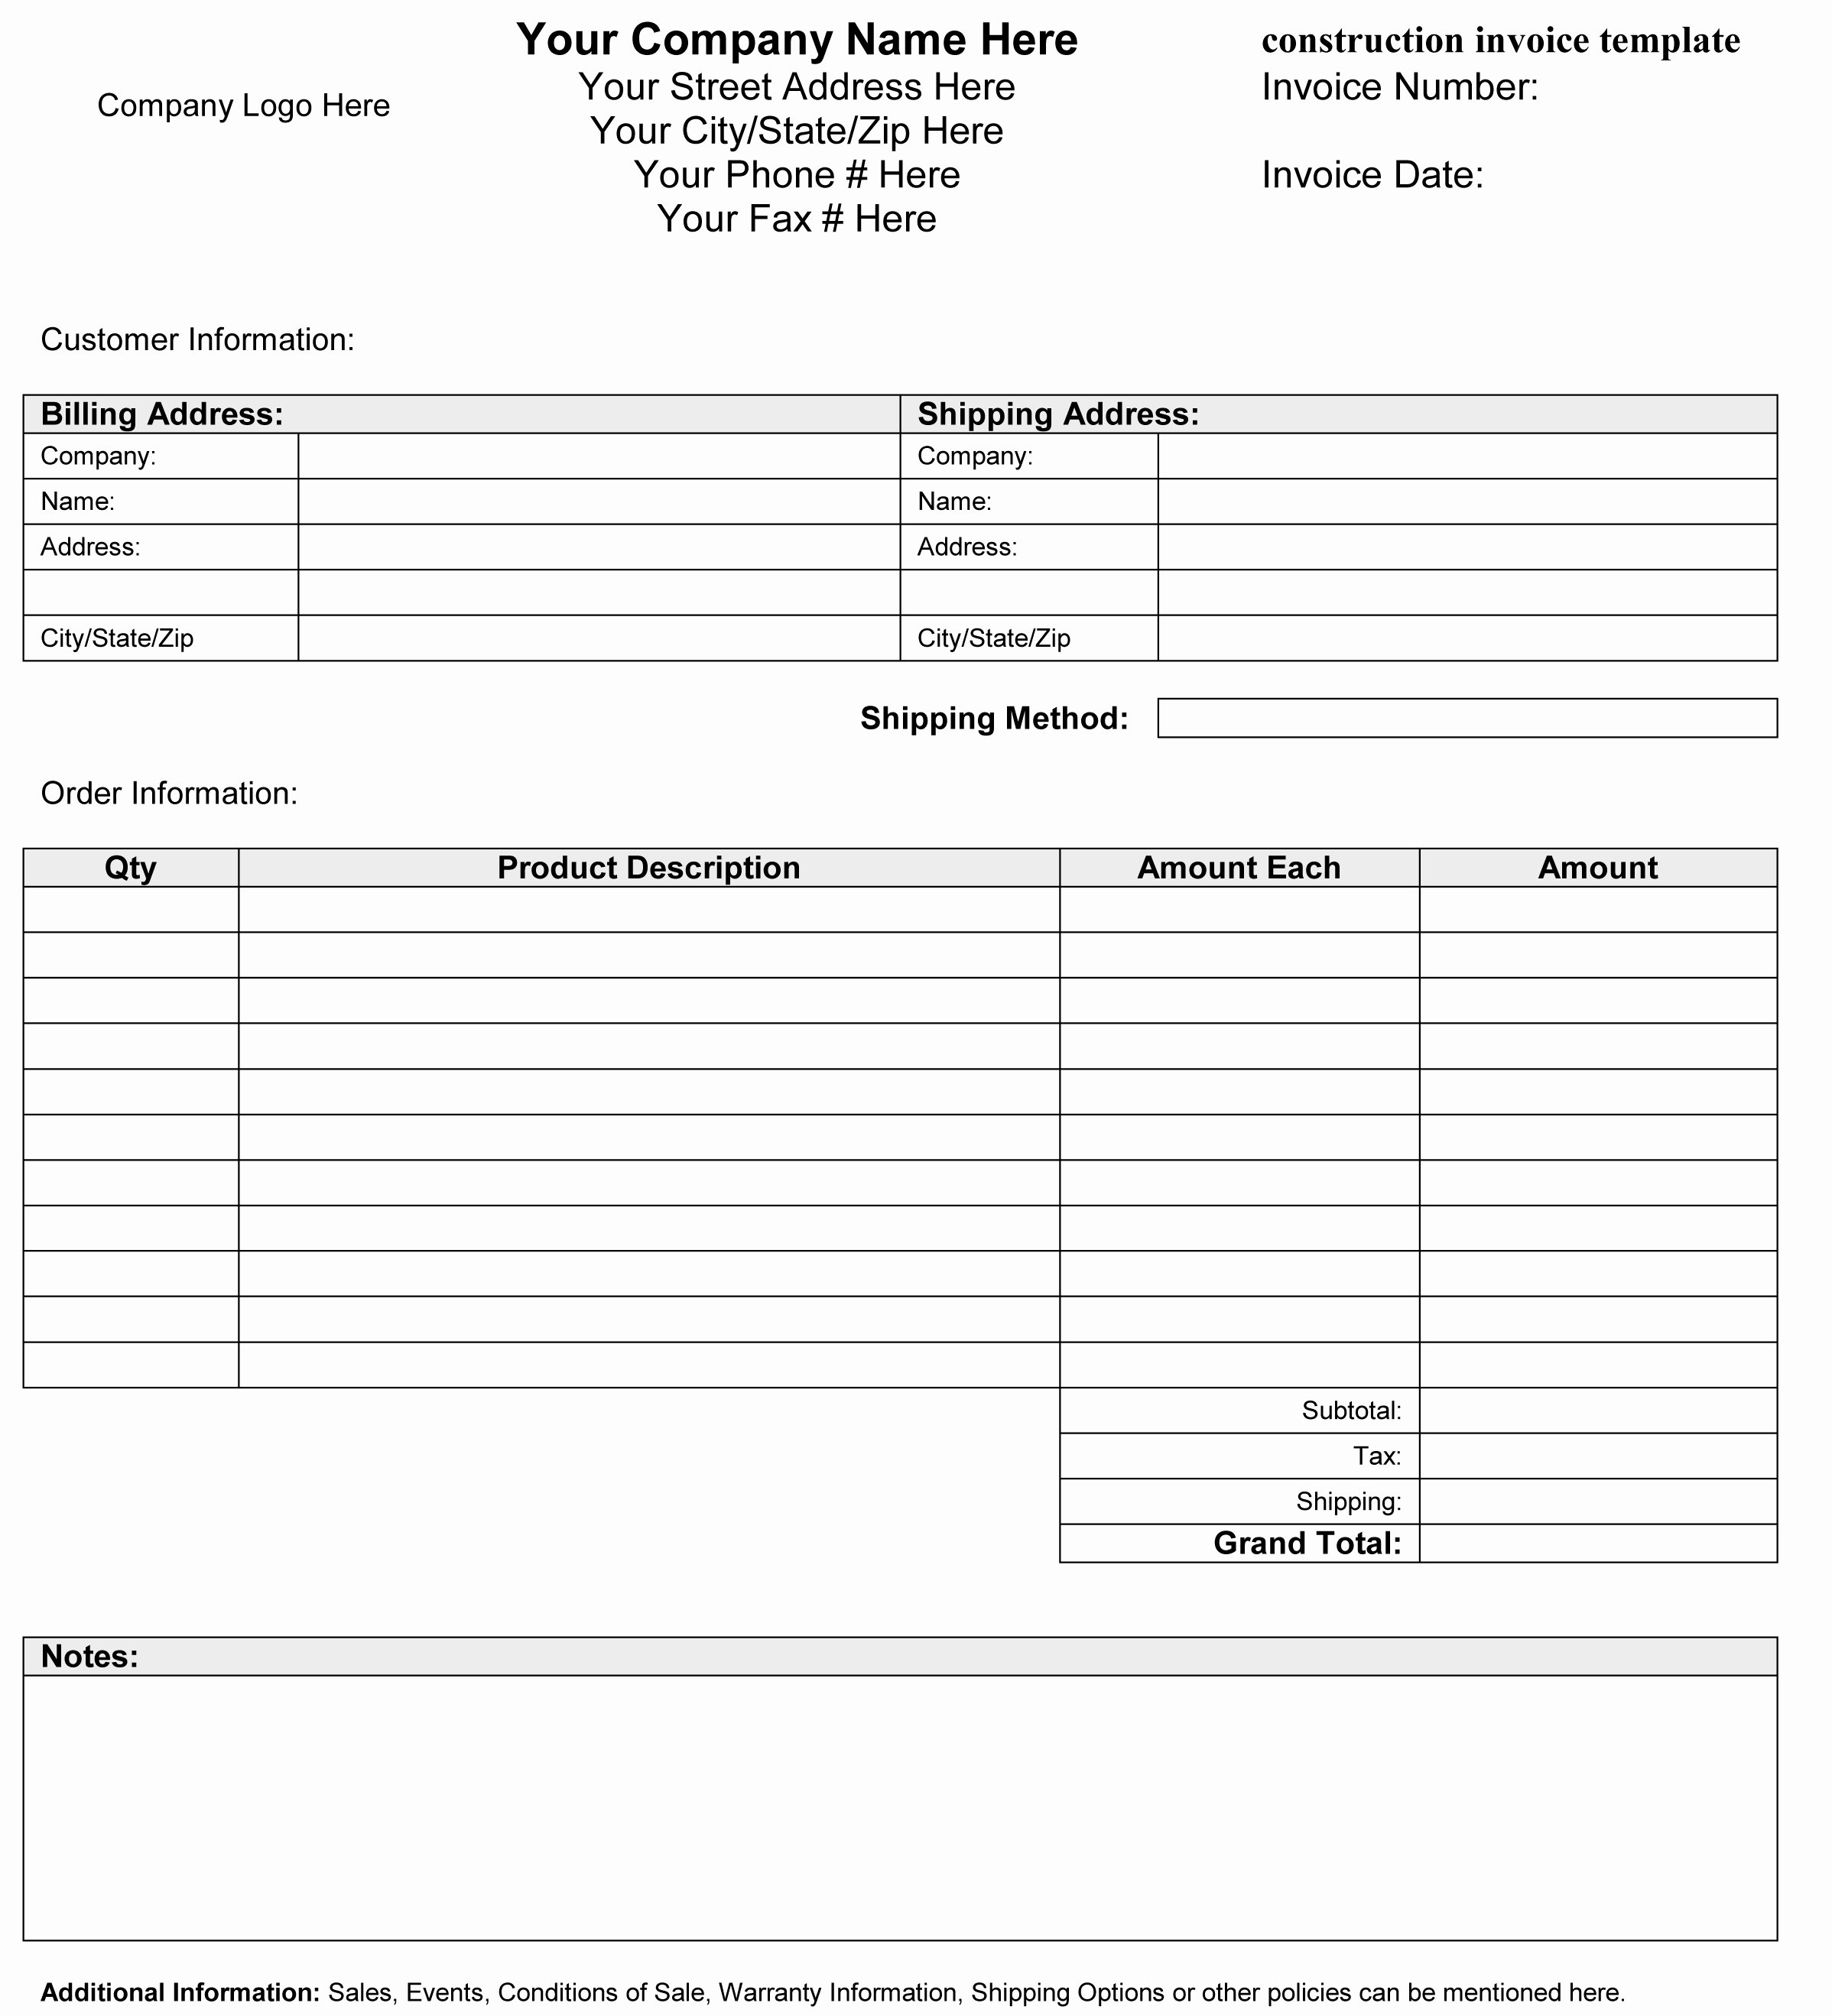 Contractor Invoice Template Word Beautiful Construction Invoice Example